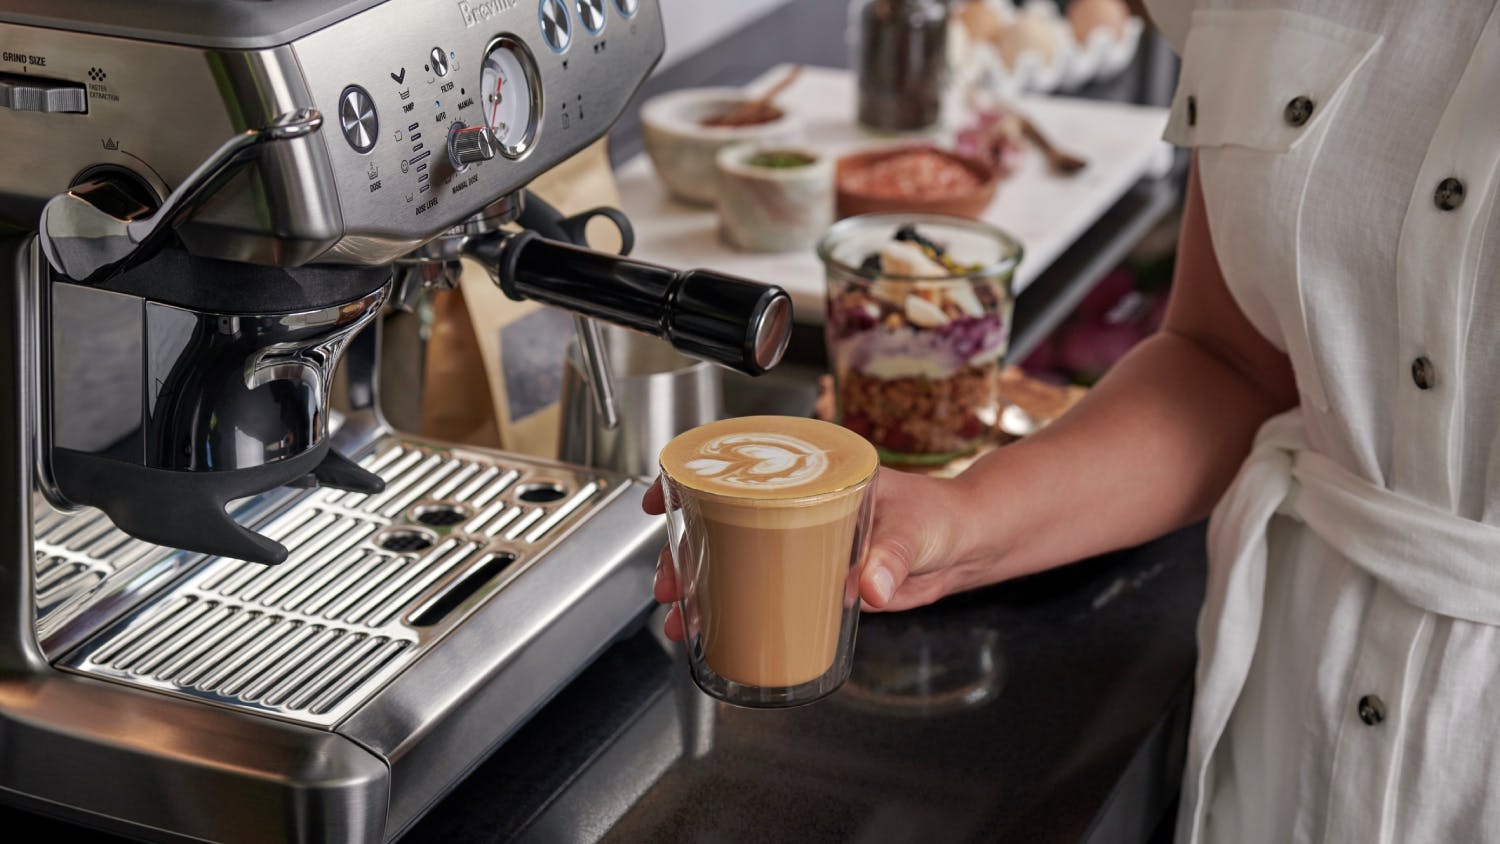 Breville the Barista Express Impress Espresso Machine - Brushed Stainless